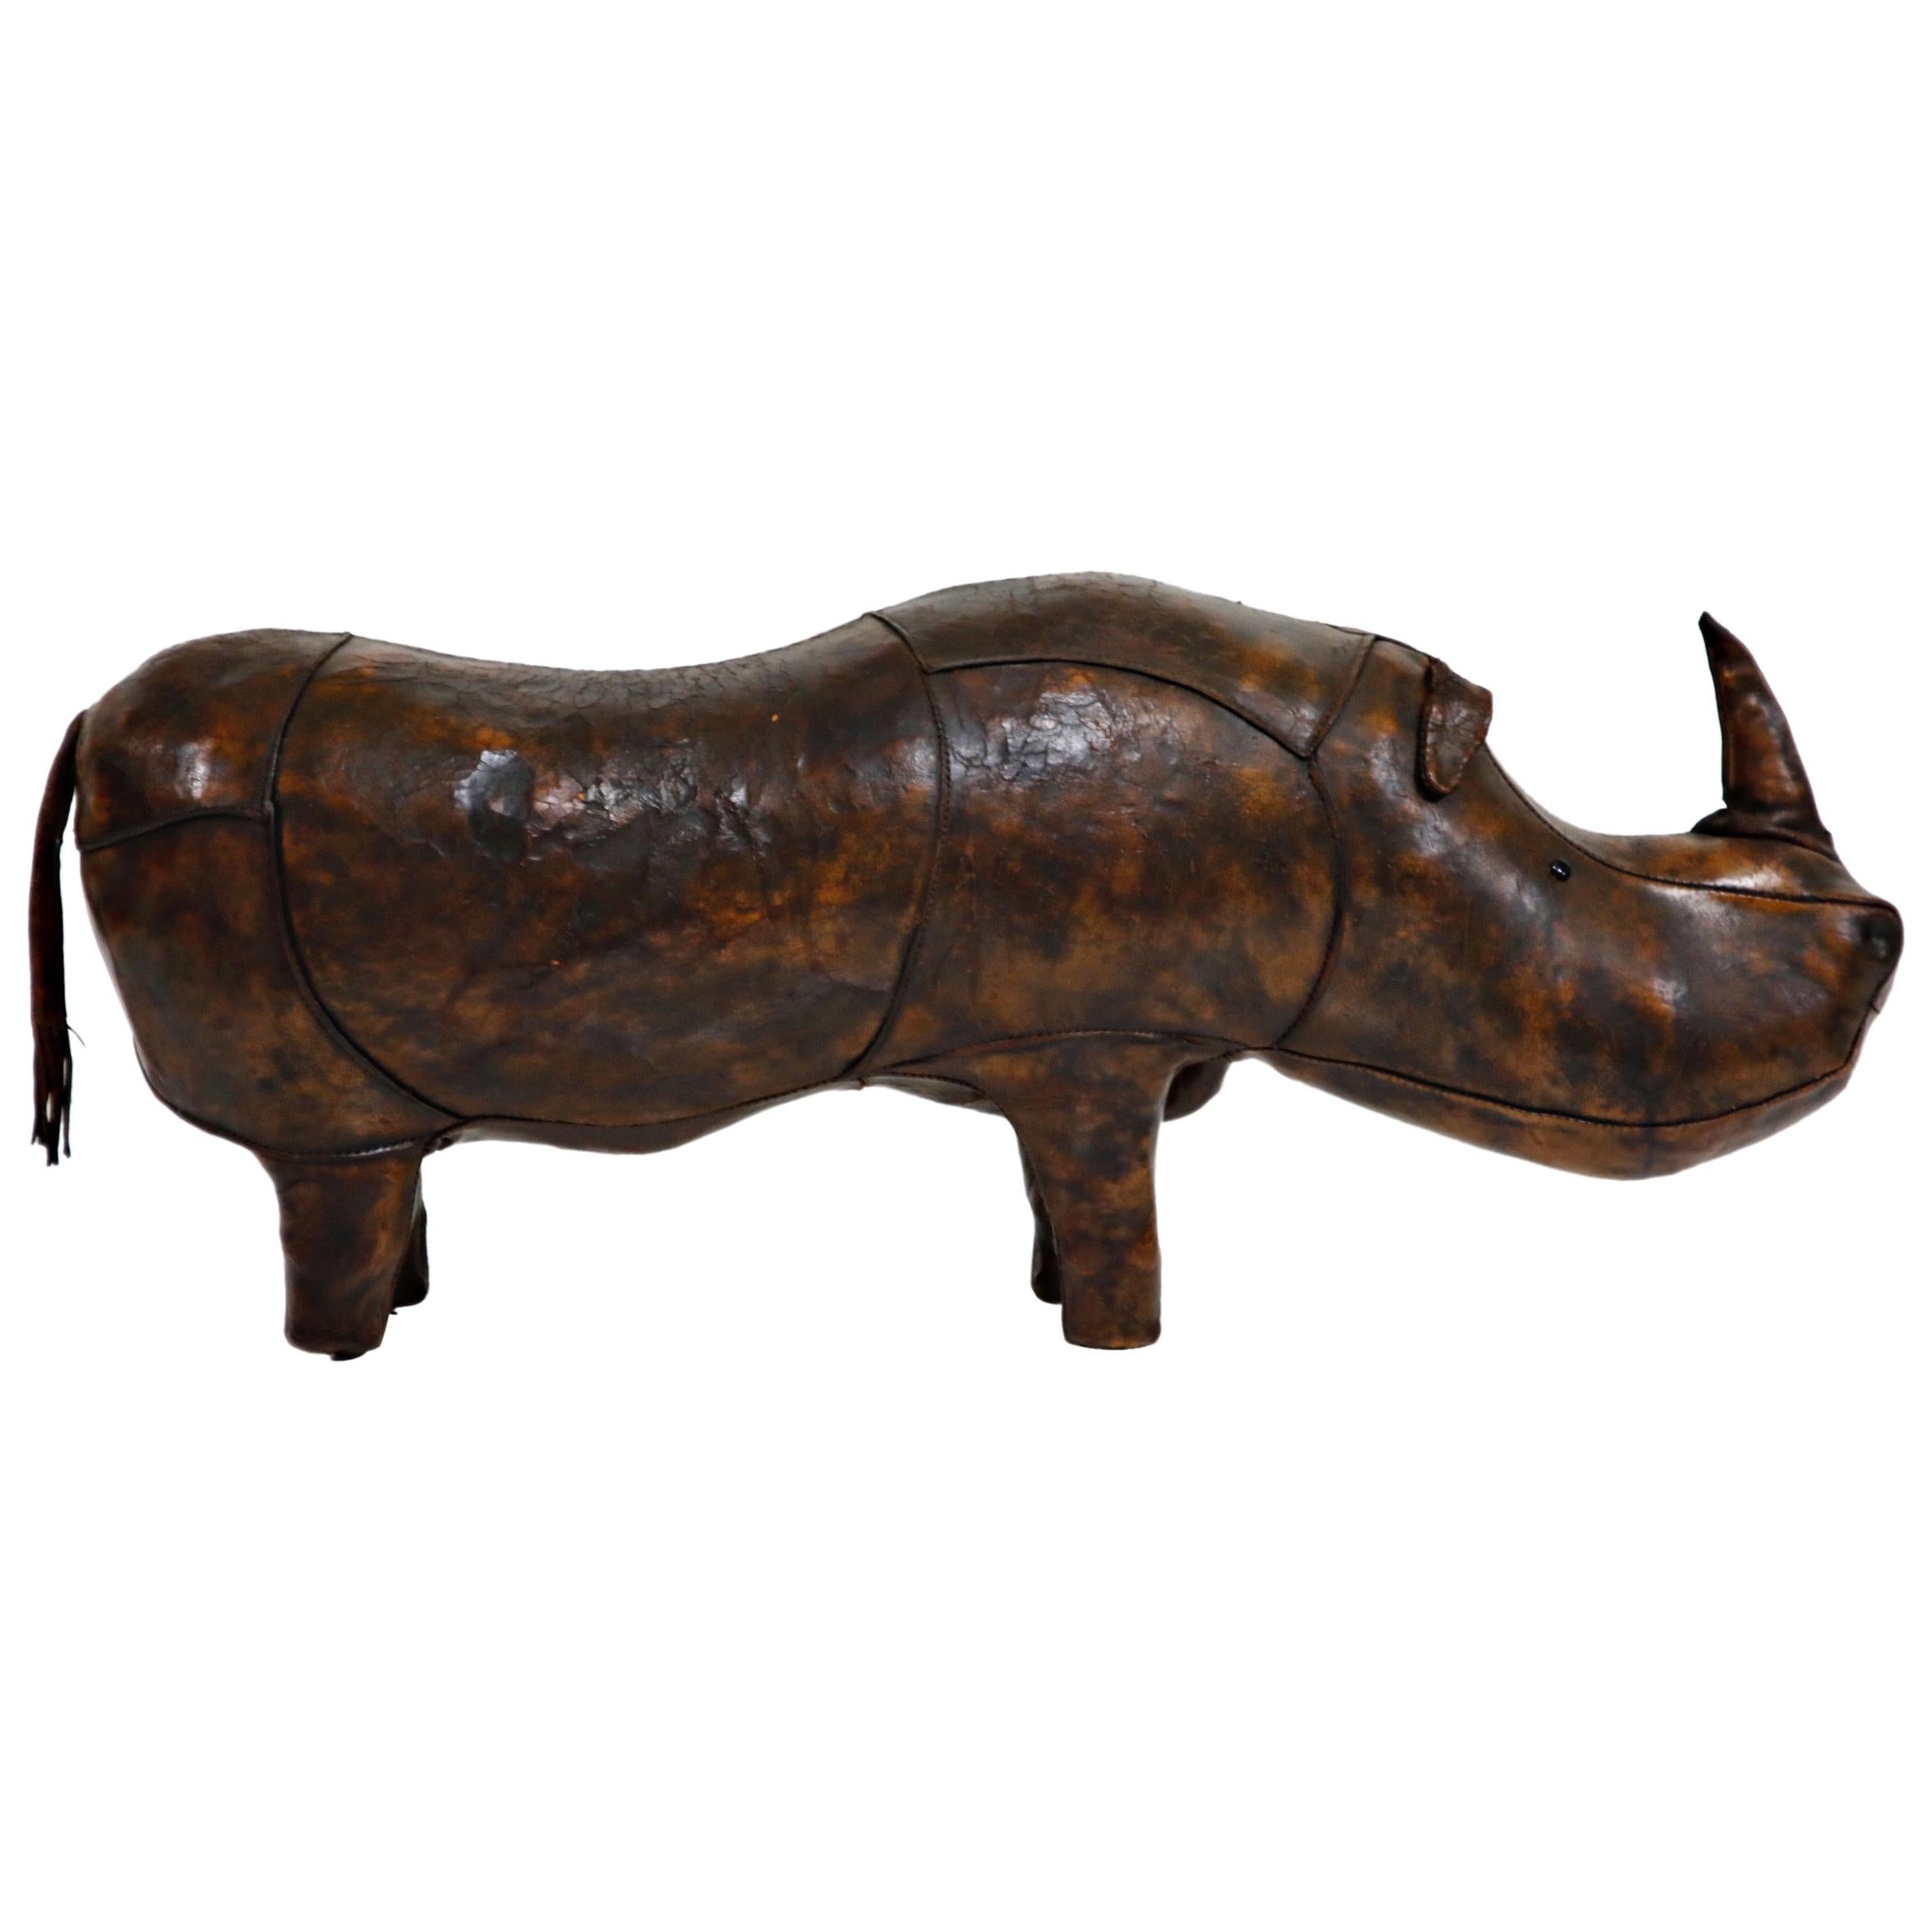 Large Rhinoceros Footstool by Dimitri Omersa for Abercrombie and Fitch, Signed